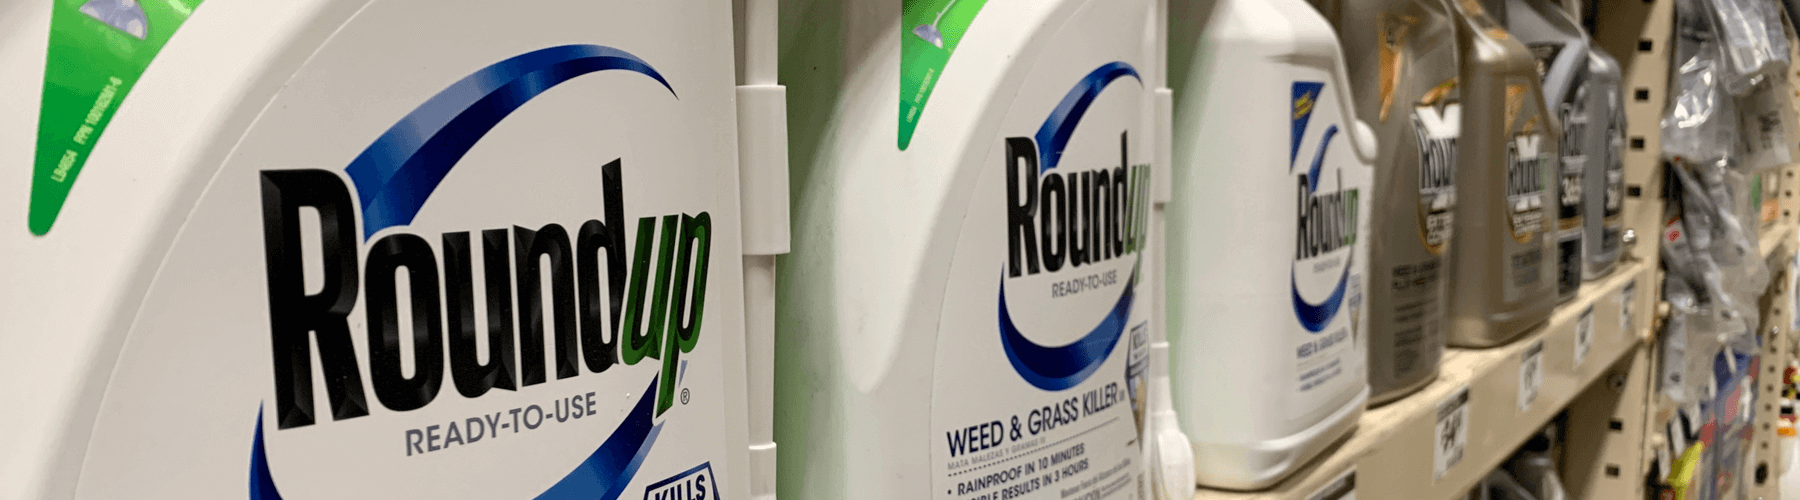 Roundup – The Supreme Court has rejected Bayer’s appeal